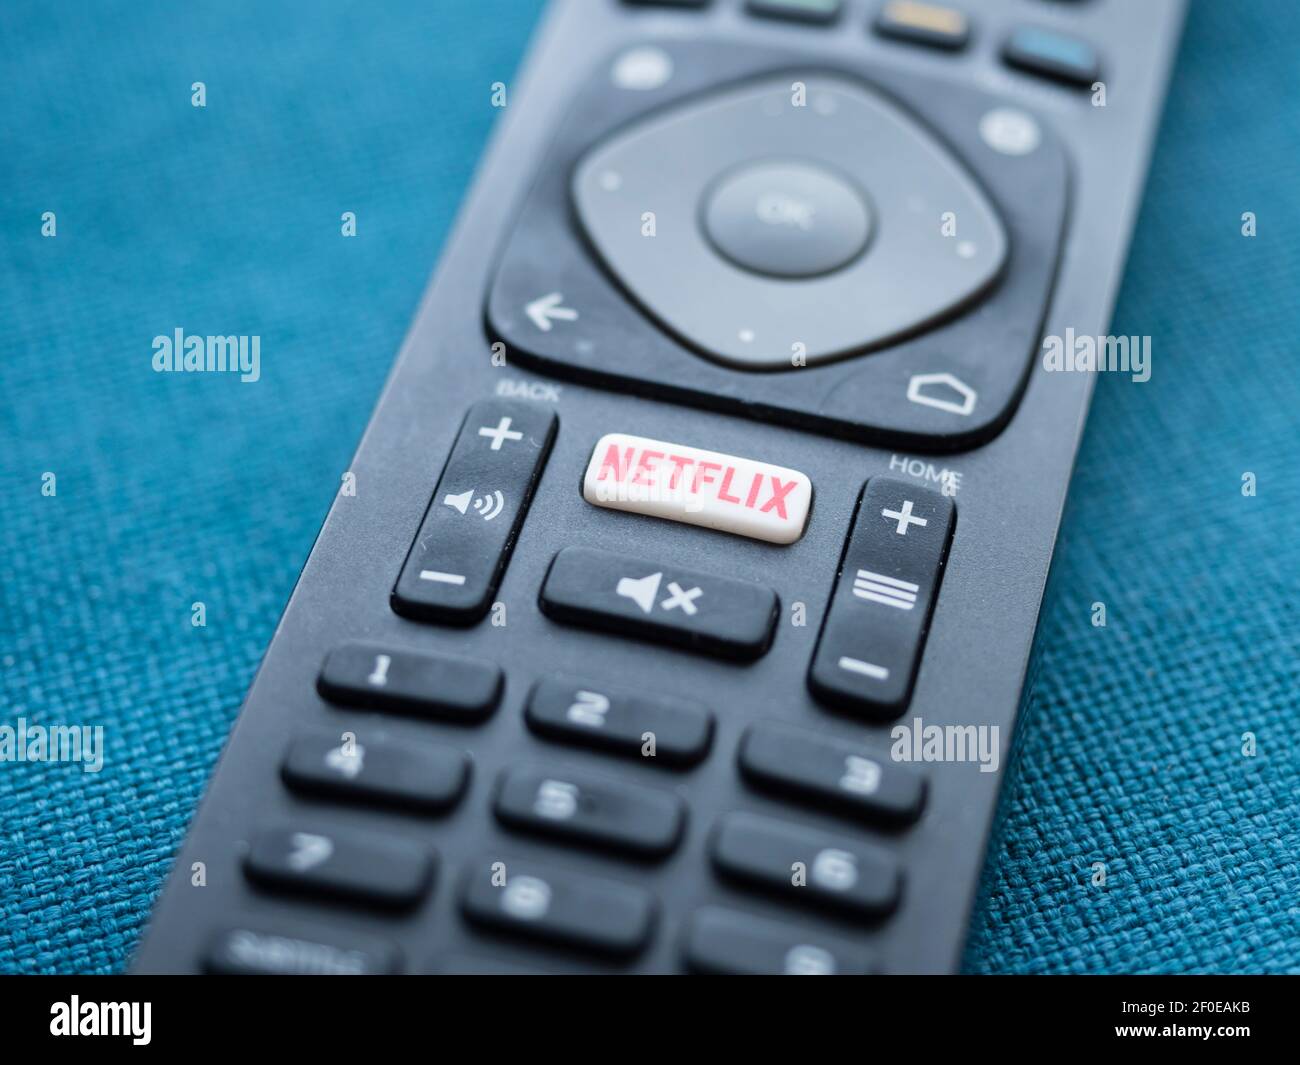 Close-up of the Netflix logo on the button of a TV remote control Stock Photo